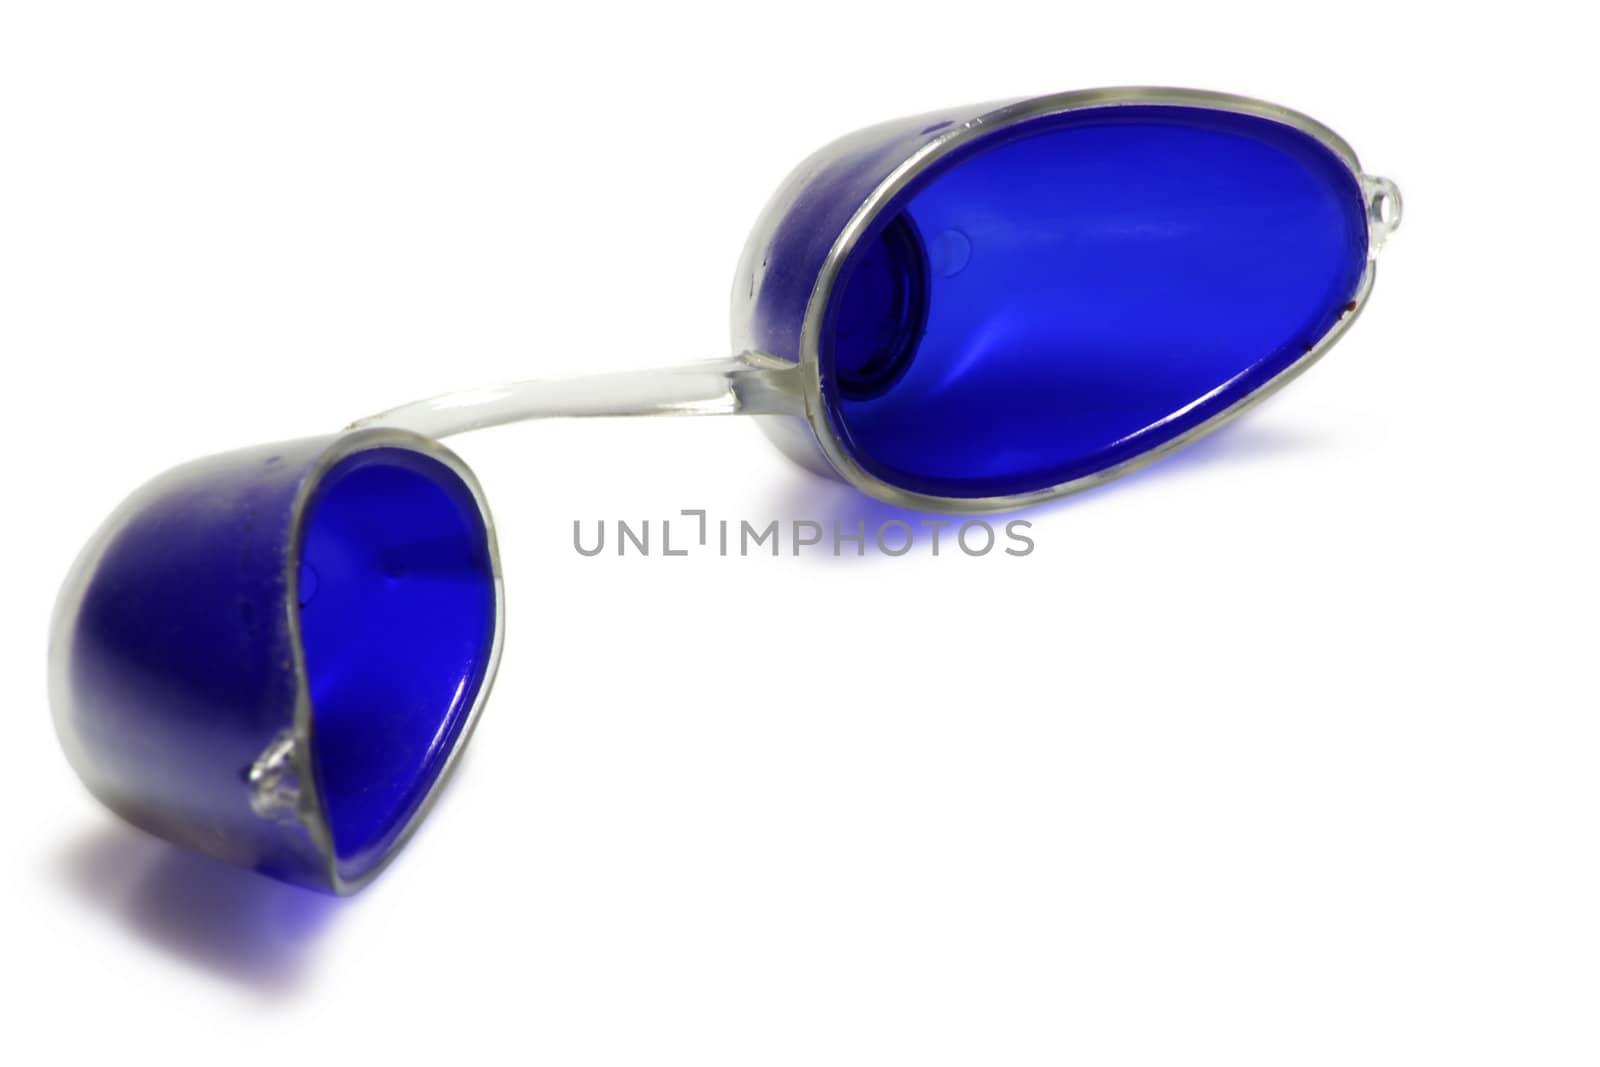 Special plastic goggles for use in a solarium. They cover the smallest possible area: the eyes only. Isolated on white.